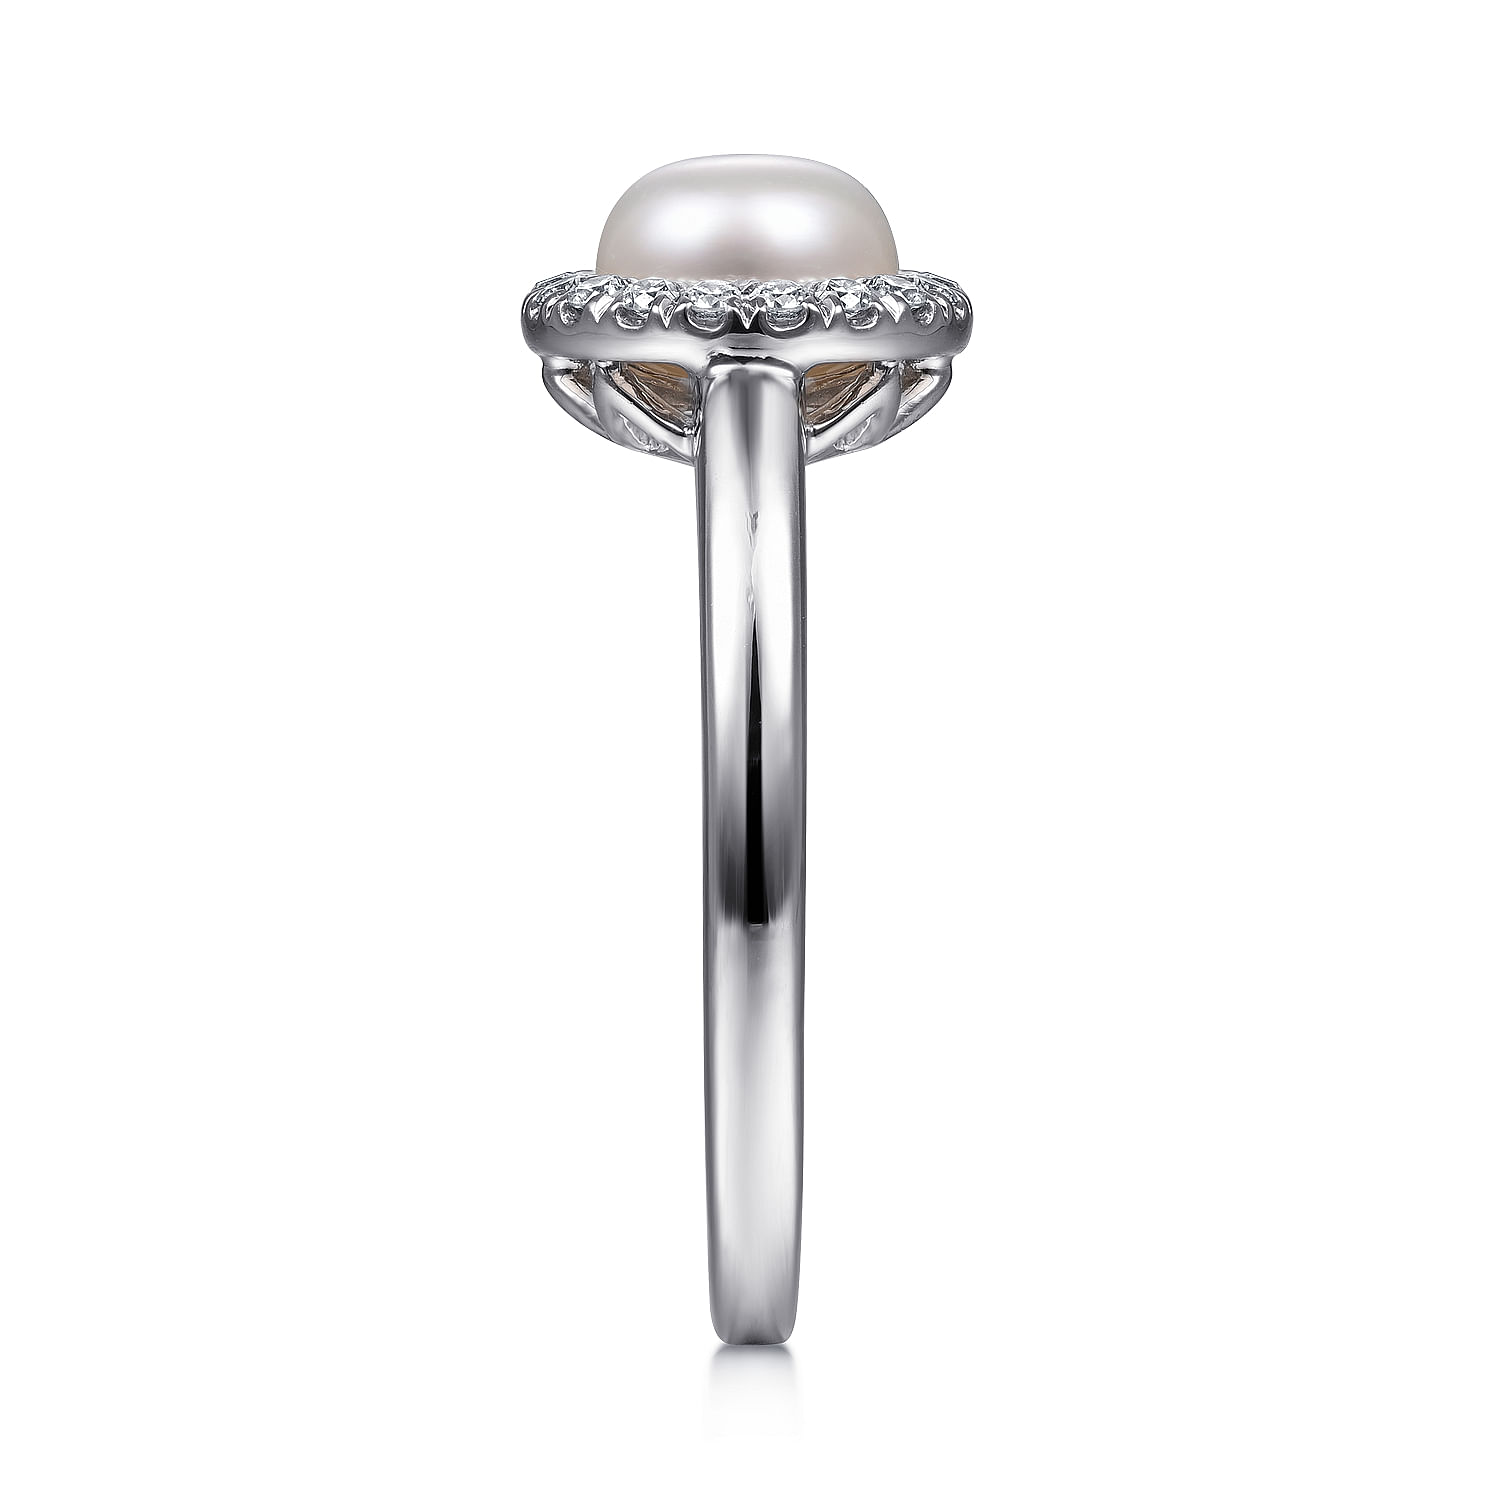 14K White Gold Pearl and Diamond Halo Ring